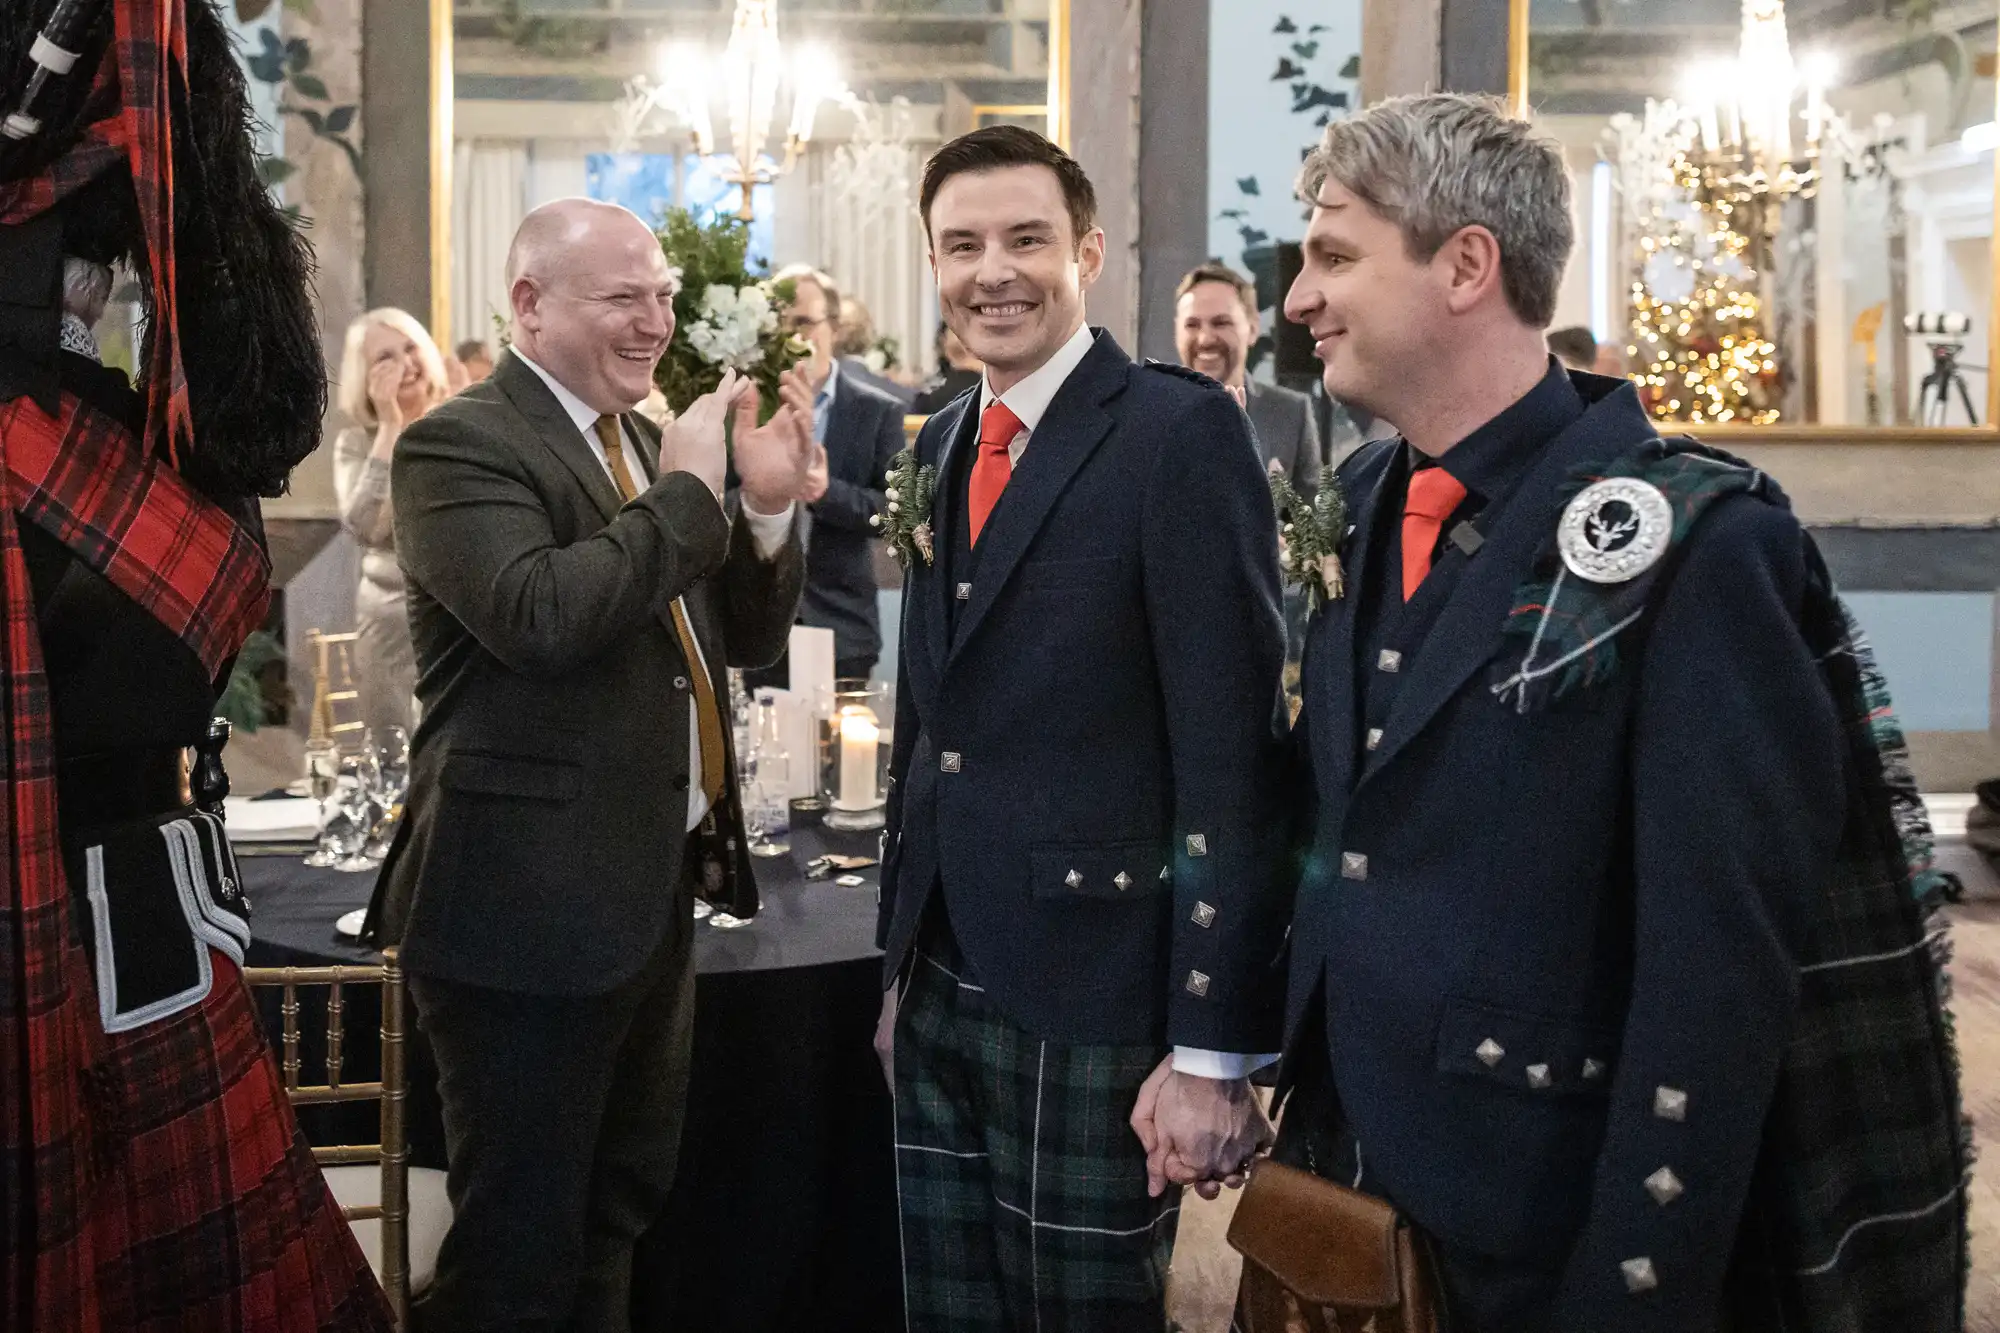 Two men in suits and kilts hold hands and smile while others around them applaud in a decorated room with tables and mirrors, suggesting a celebratory event.